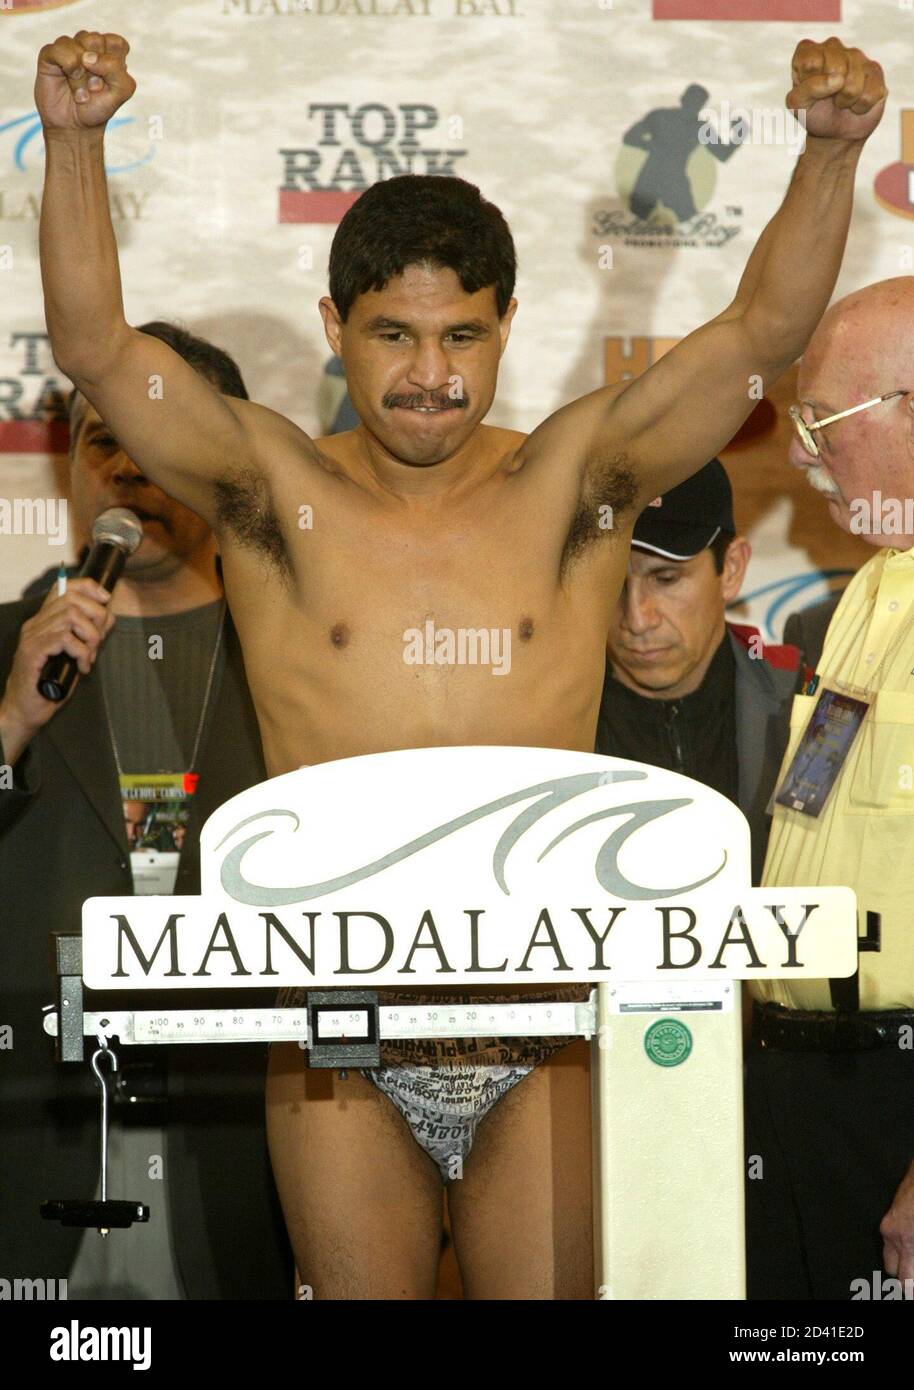 Yory Boy Campas of Navajoa, Mexico weighs in at the Mandalay Bay Events Center in Las Vegas, Nevada, May 2, 2003. Campas (80-5) challenges WBC/WBA super welterweight champion Oscar De La Hoya (35-2) of Los Angeles at the events center May 3. REUTERS/Steve Marcus  SM/GAC Stock Photo